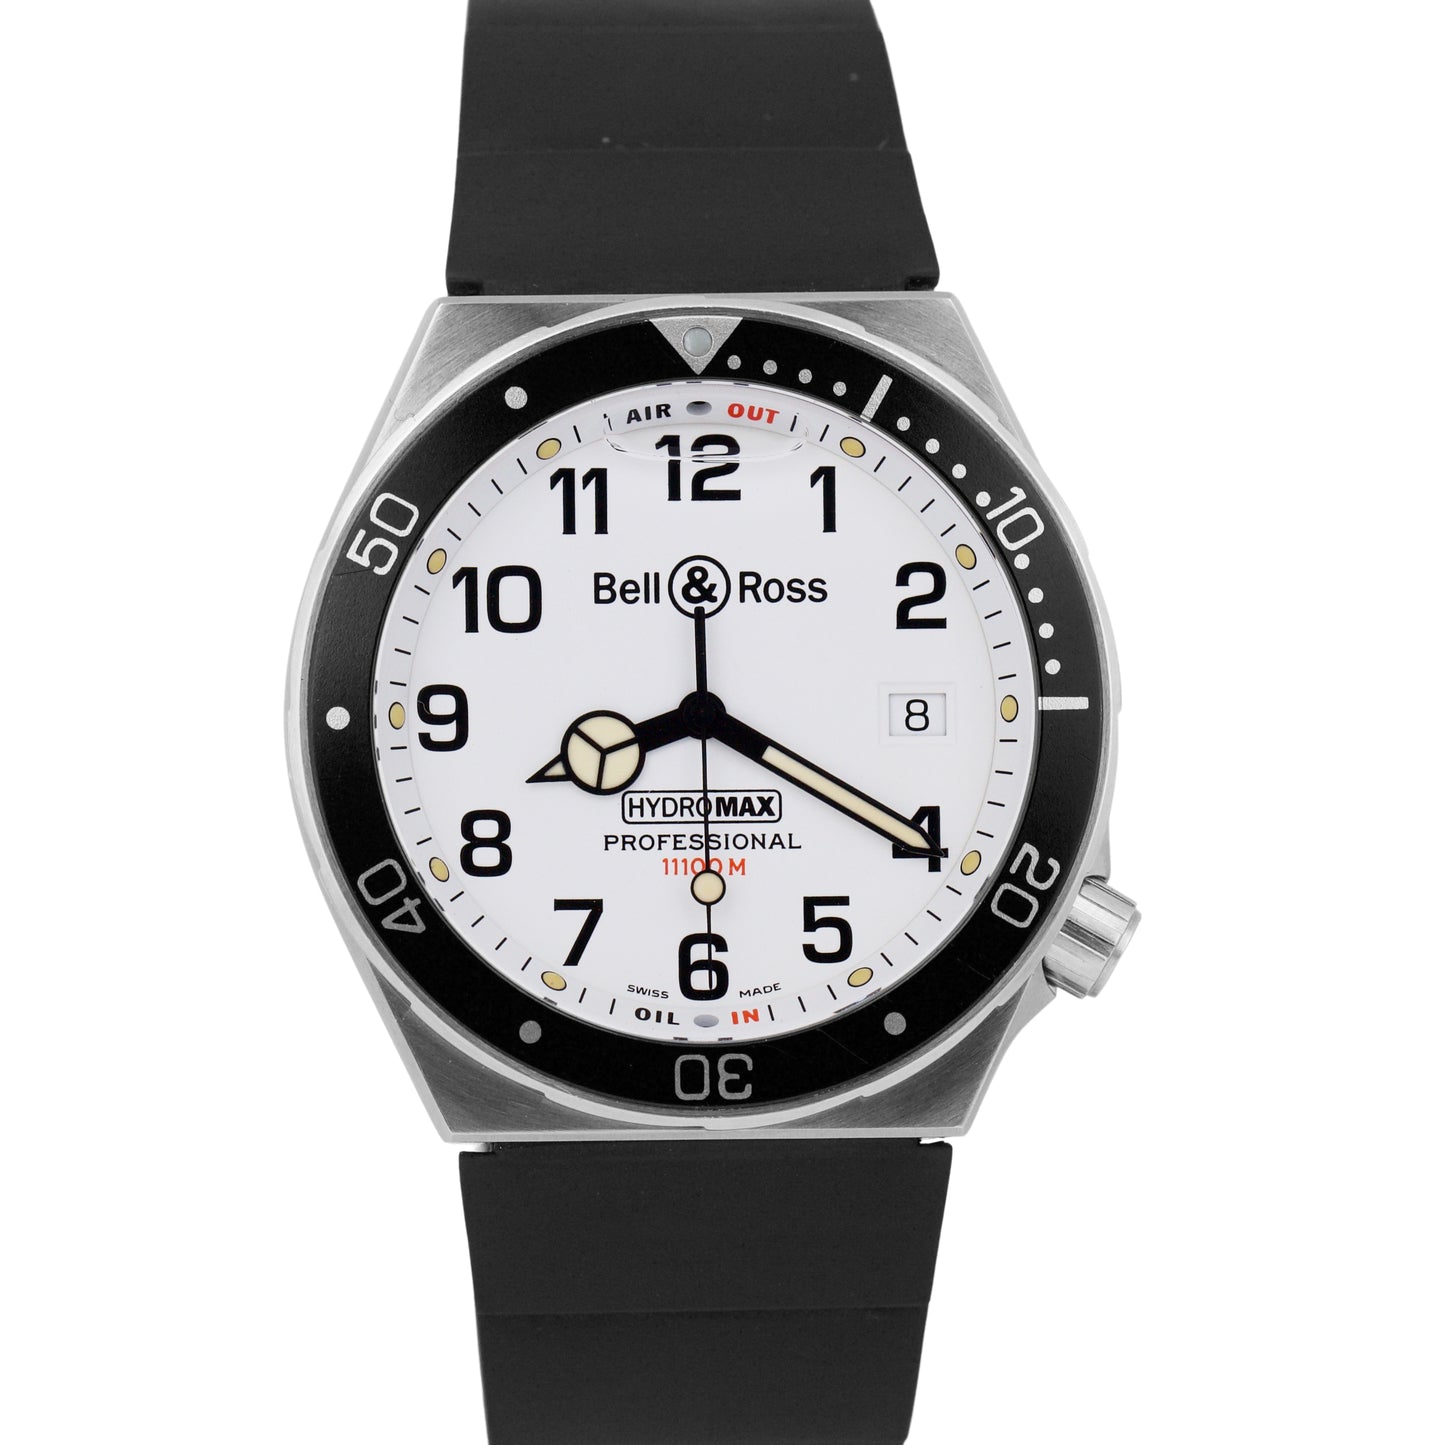 PAPERS Bell & Ross HydroMax Professional PAPERS Steel 39mm Quartz 11100M B+P